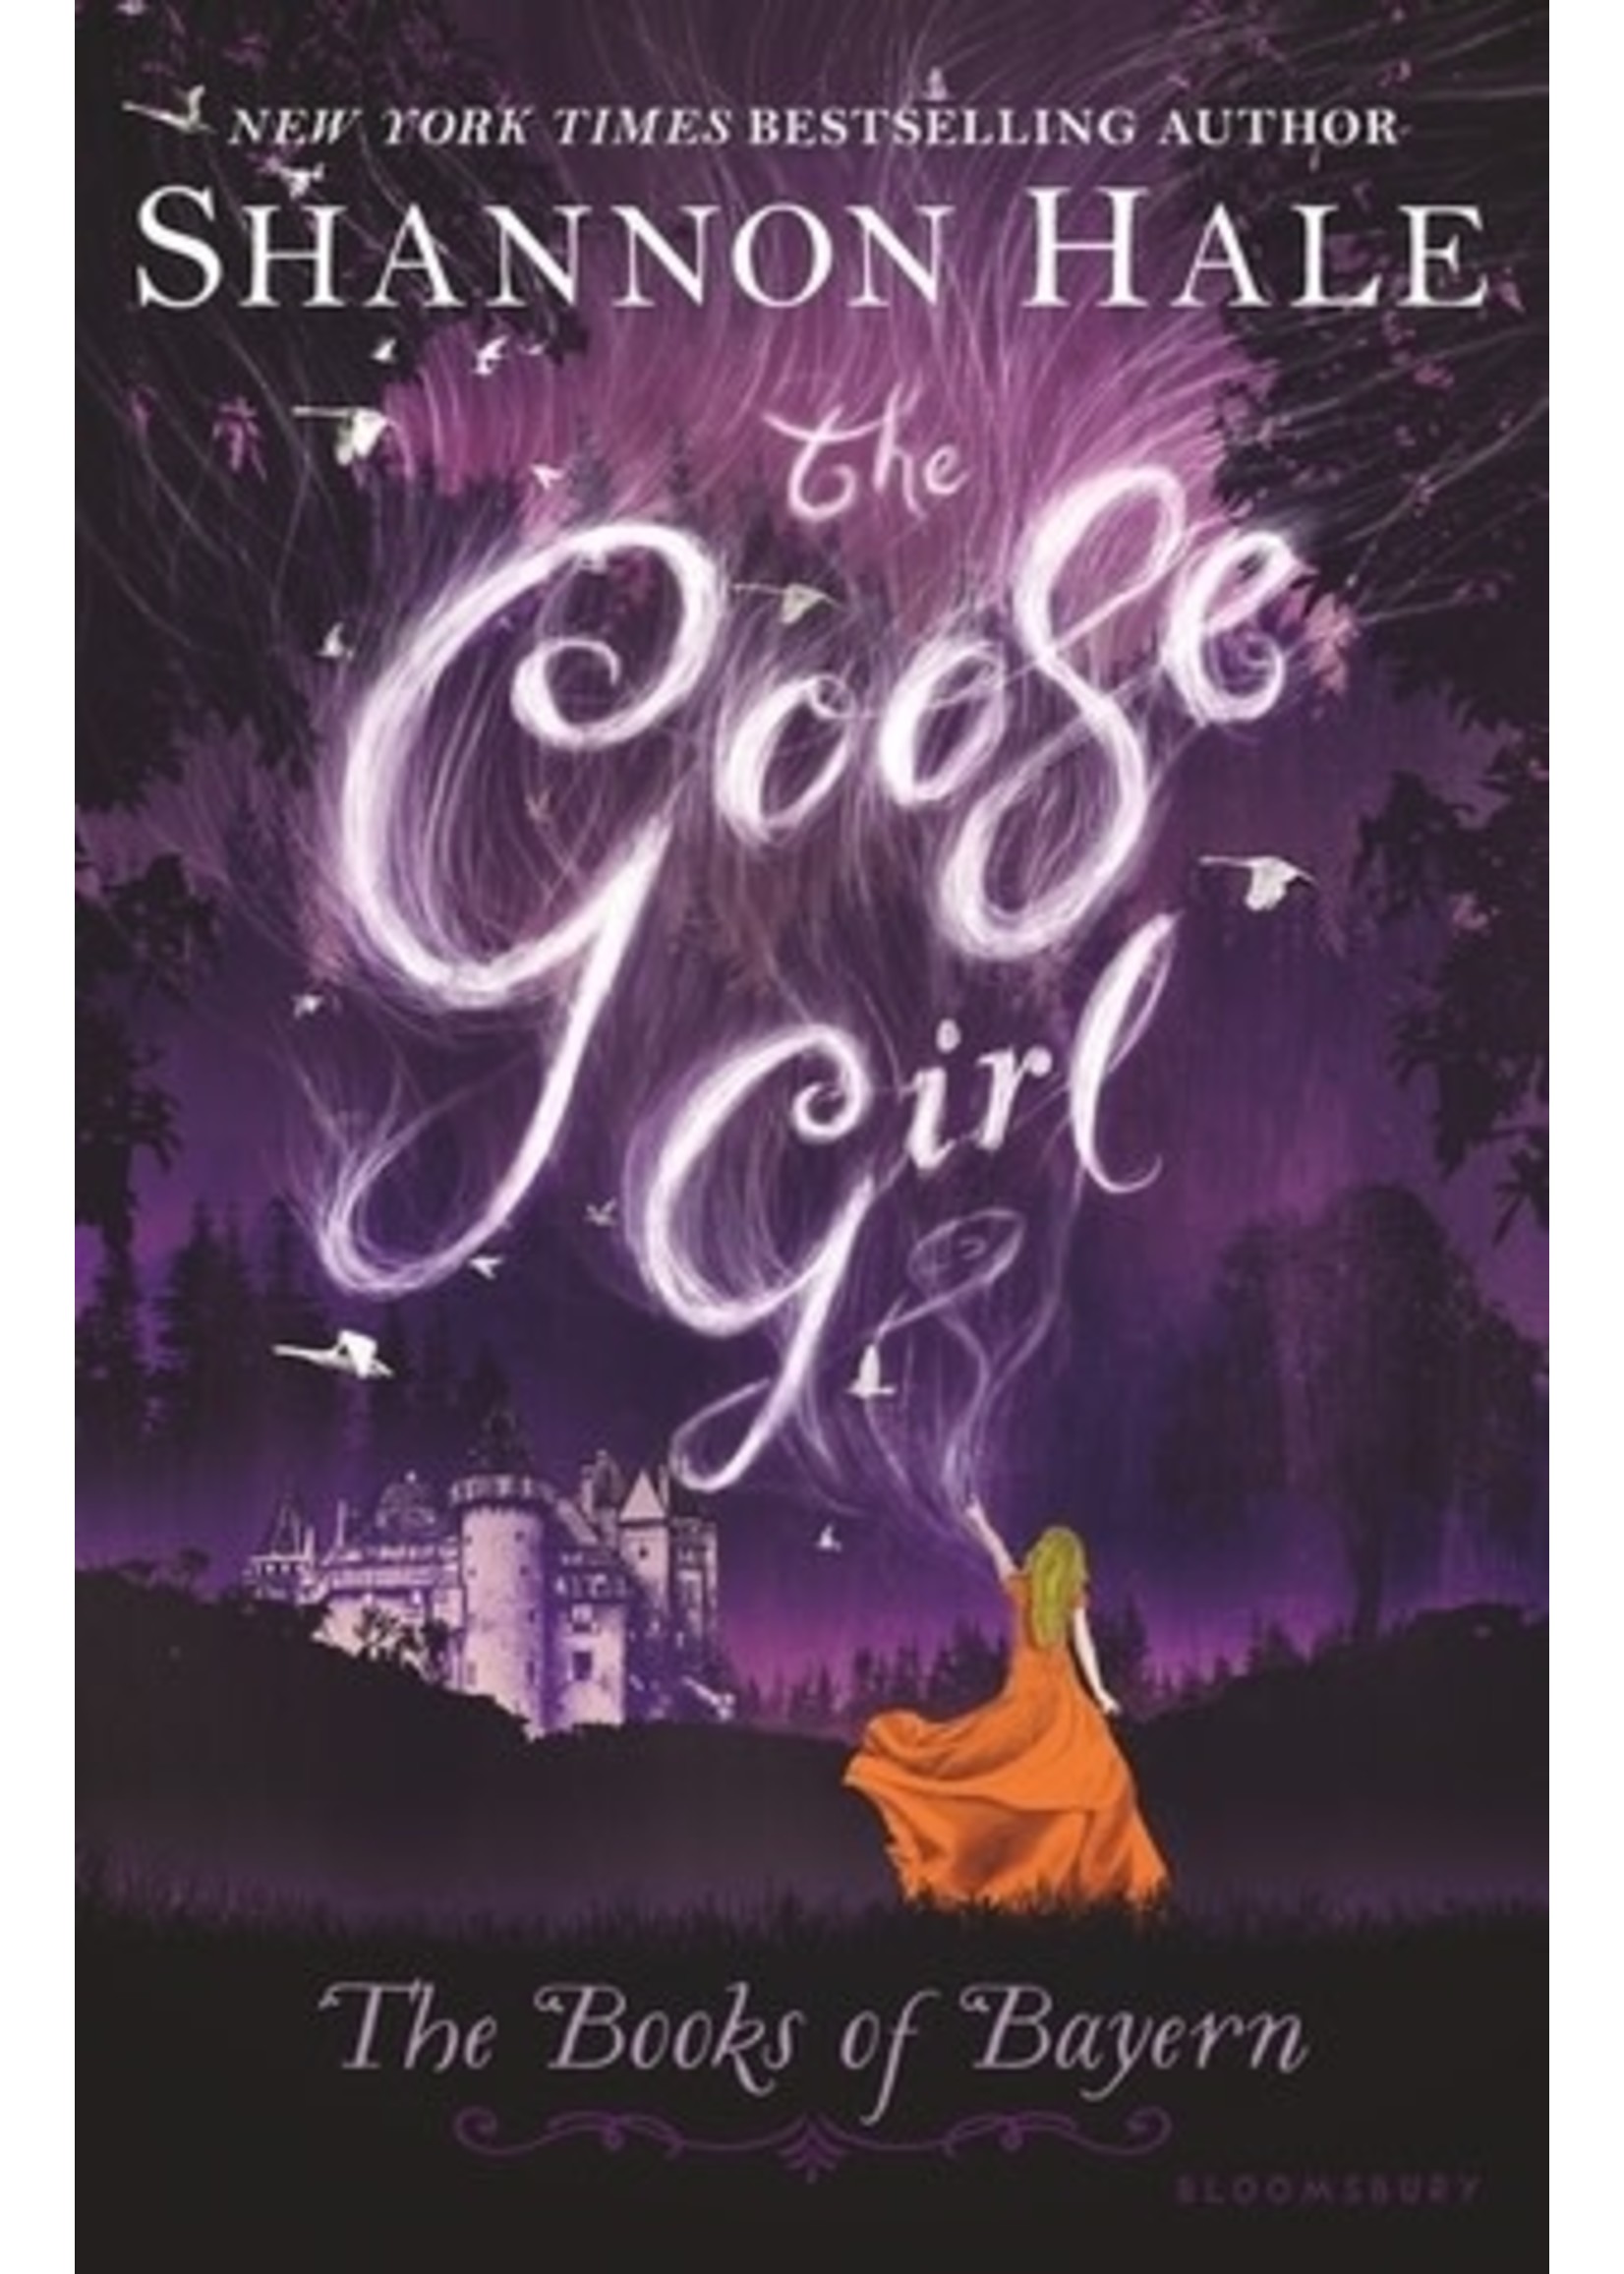 The Goose Girl (The Books of Bayern #1) by Shannon Hale